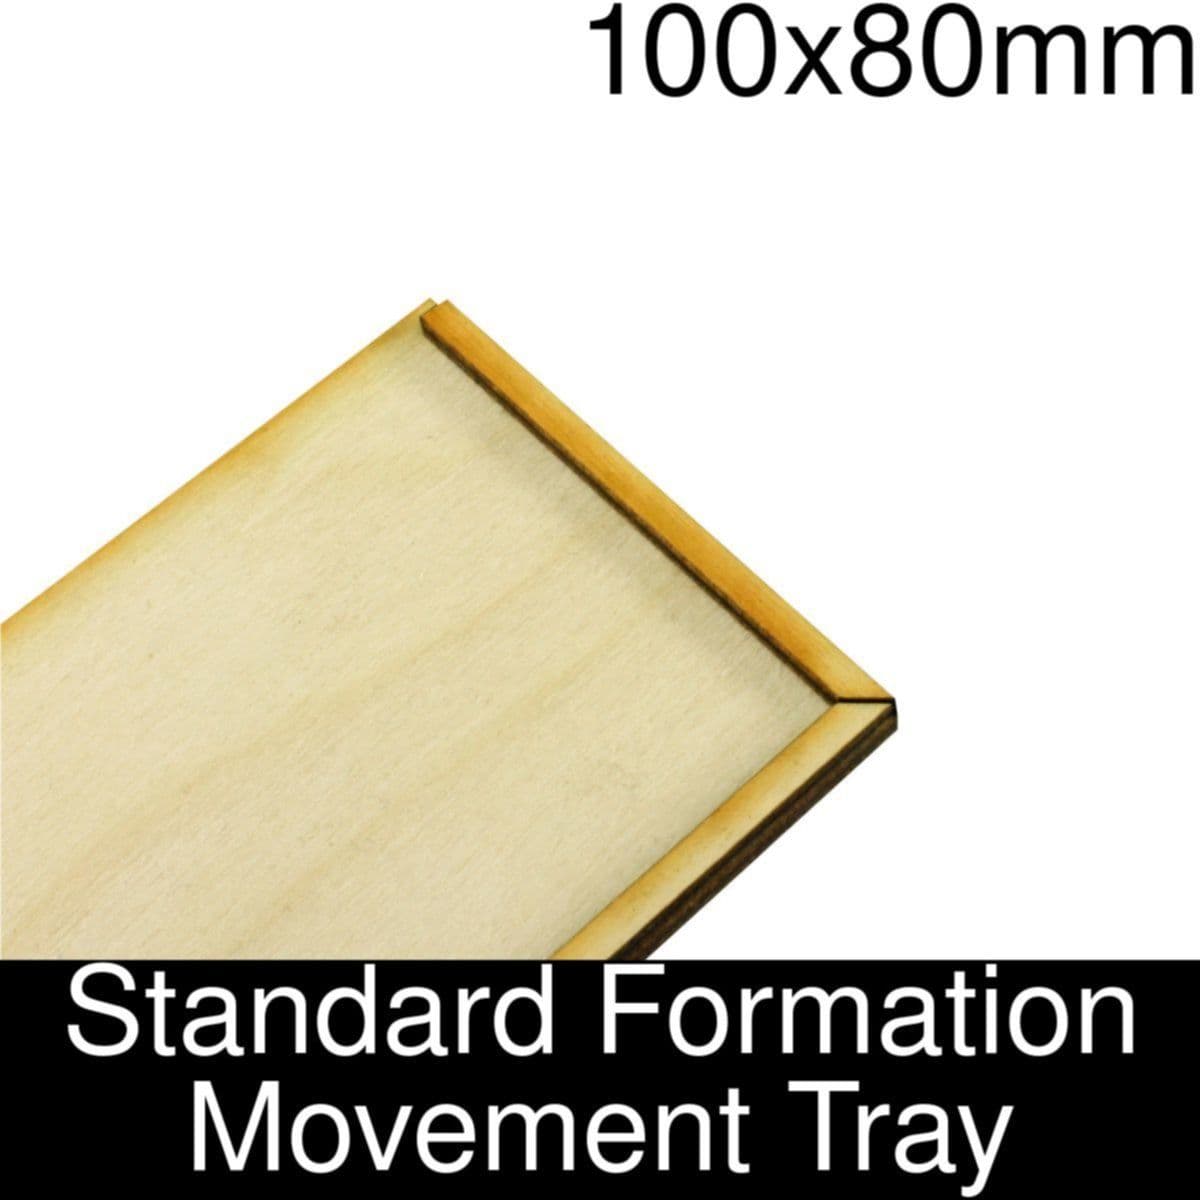 Formation Movement Tray: 100x80mm Standard Tray Kit